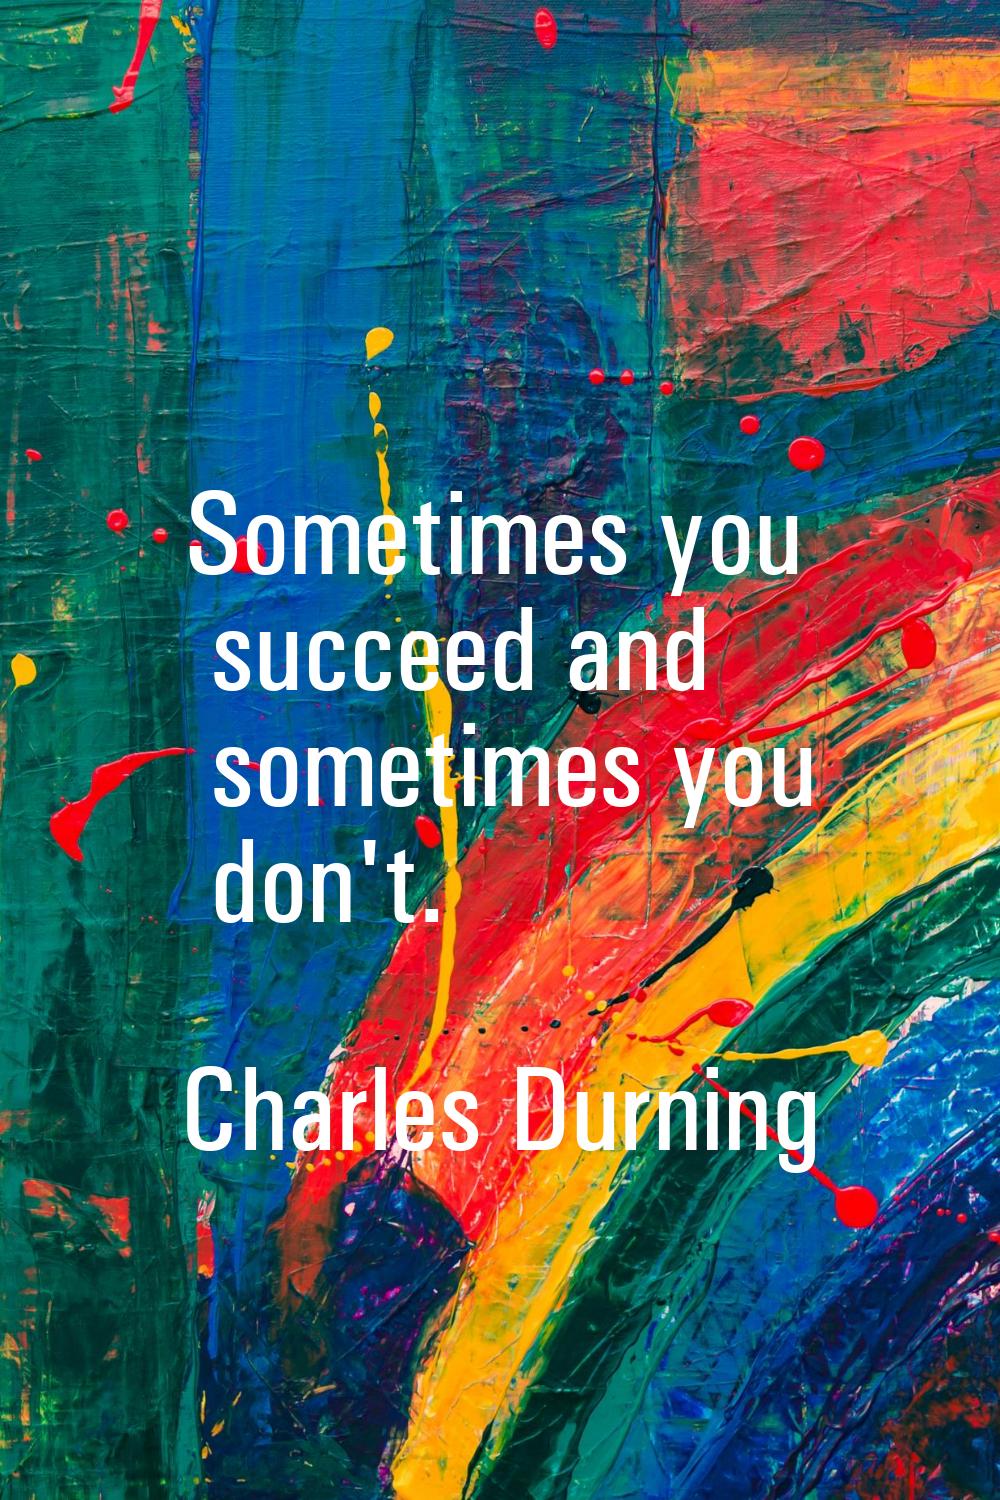 Sometimes you succeed and sometimes you don't.